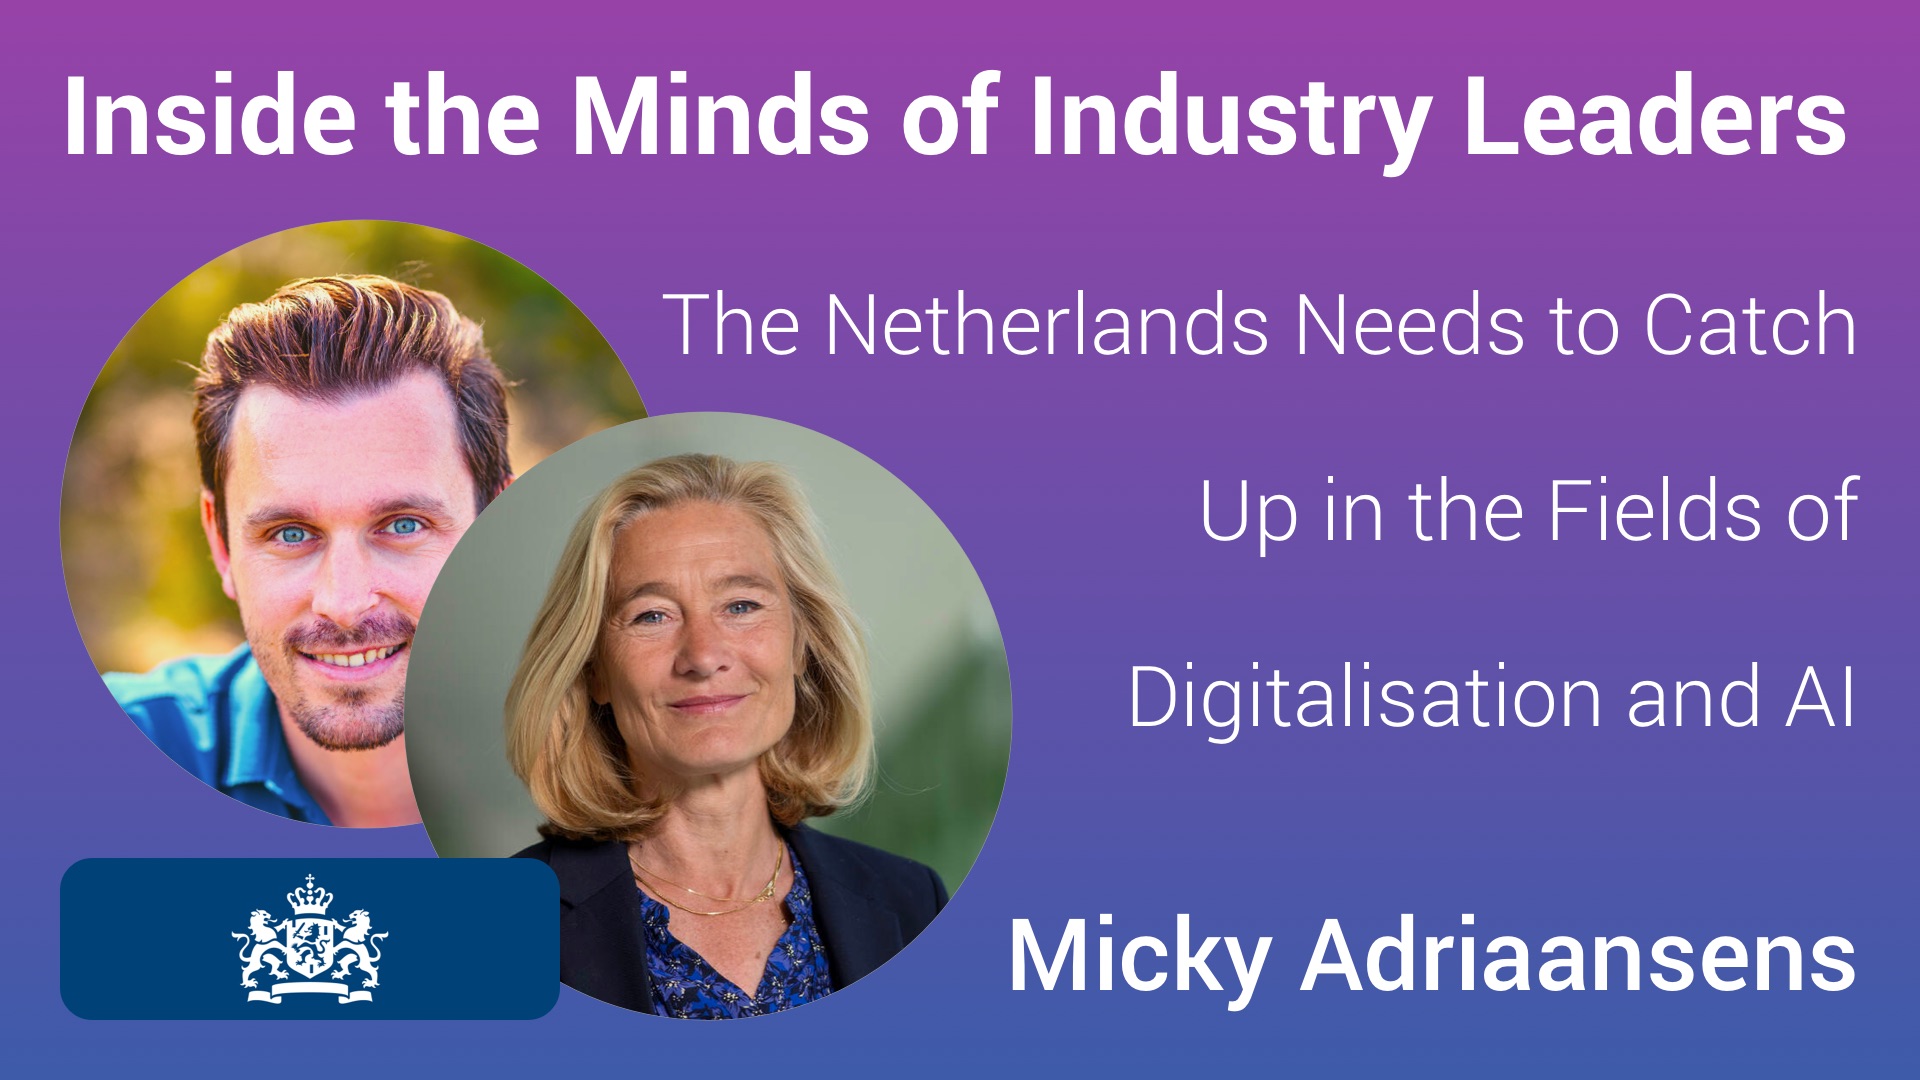 The Netherlands Needs to Catch Up in the Fields of Digitalisation and AI